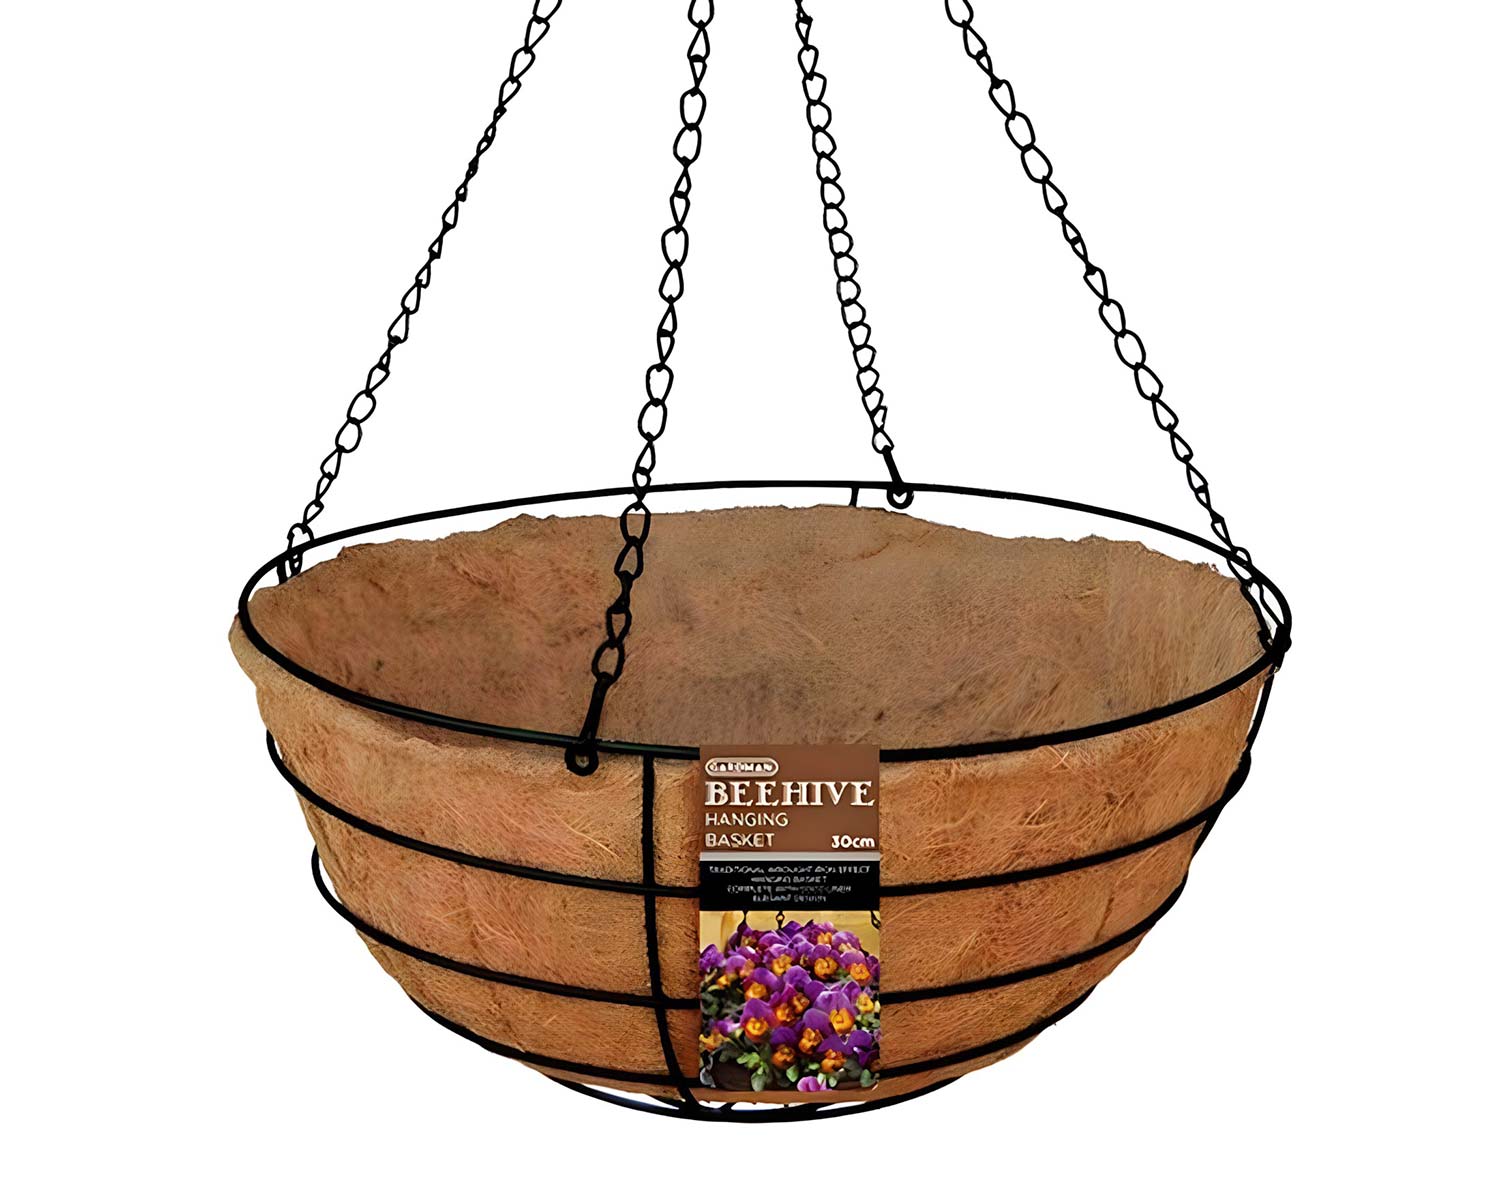 Beehive hanging basket with coir liner - 30cms